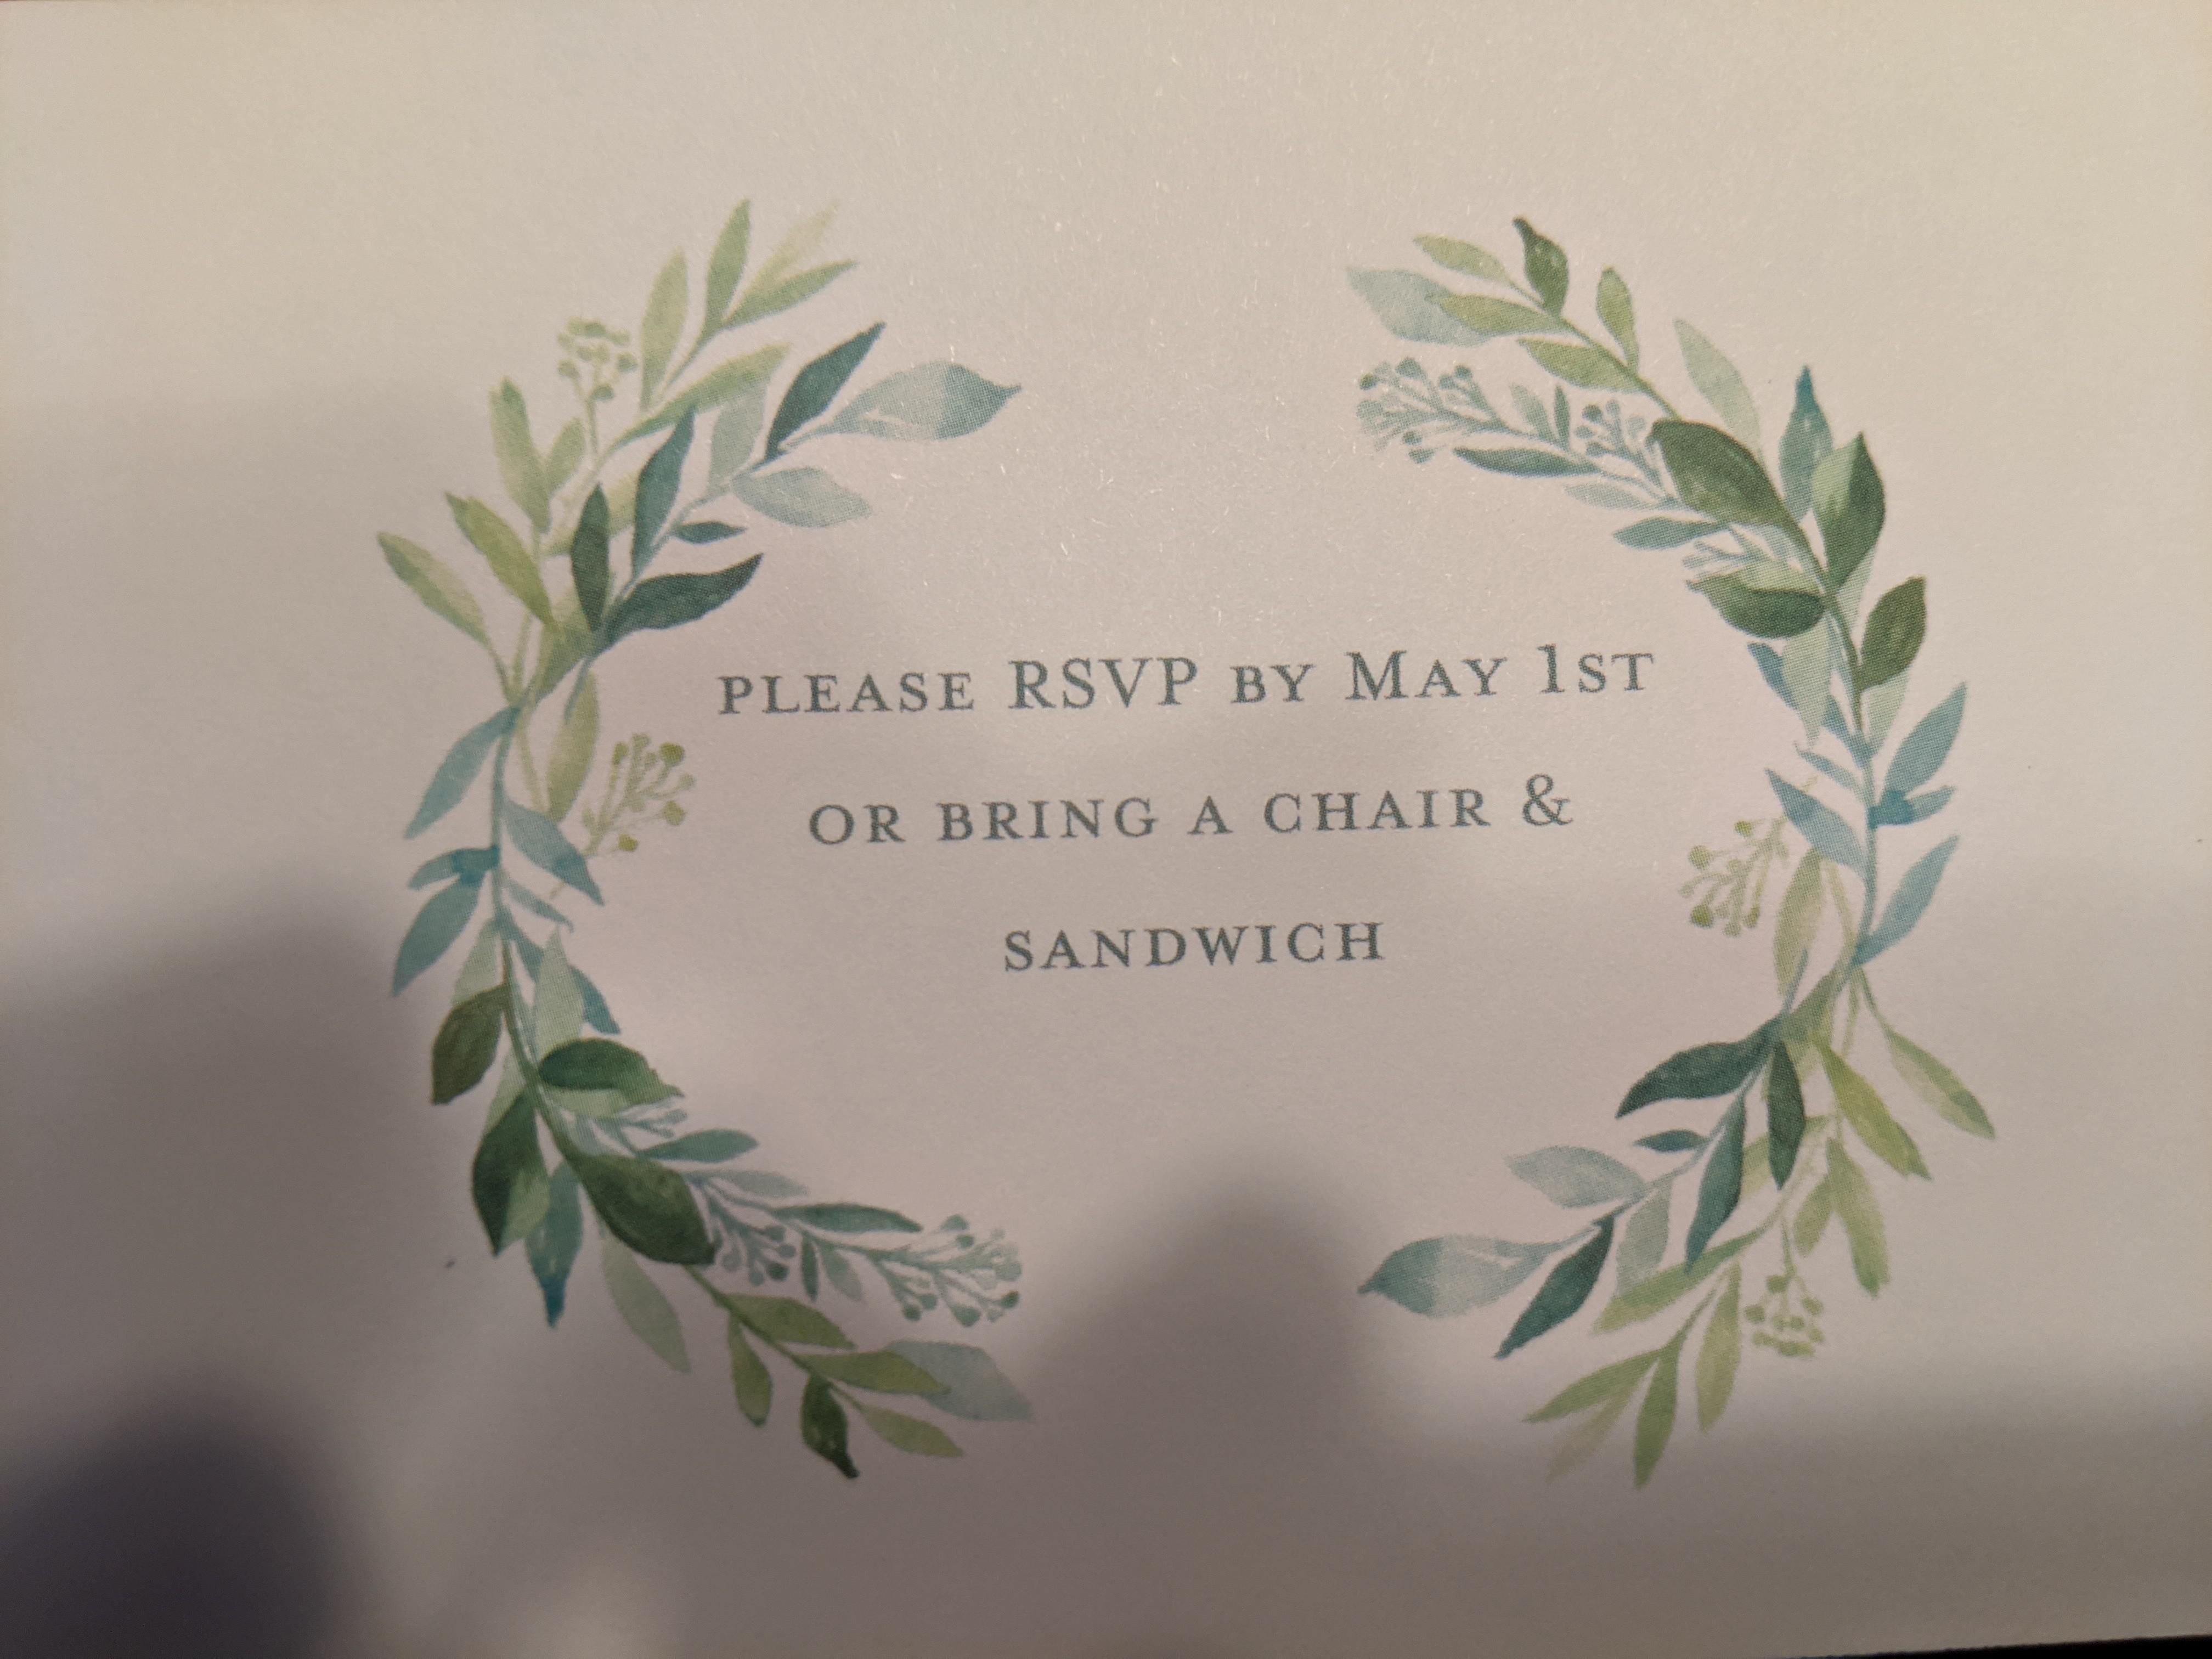 On the back of my friends' wedding RSVP card